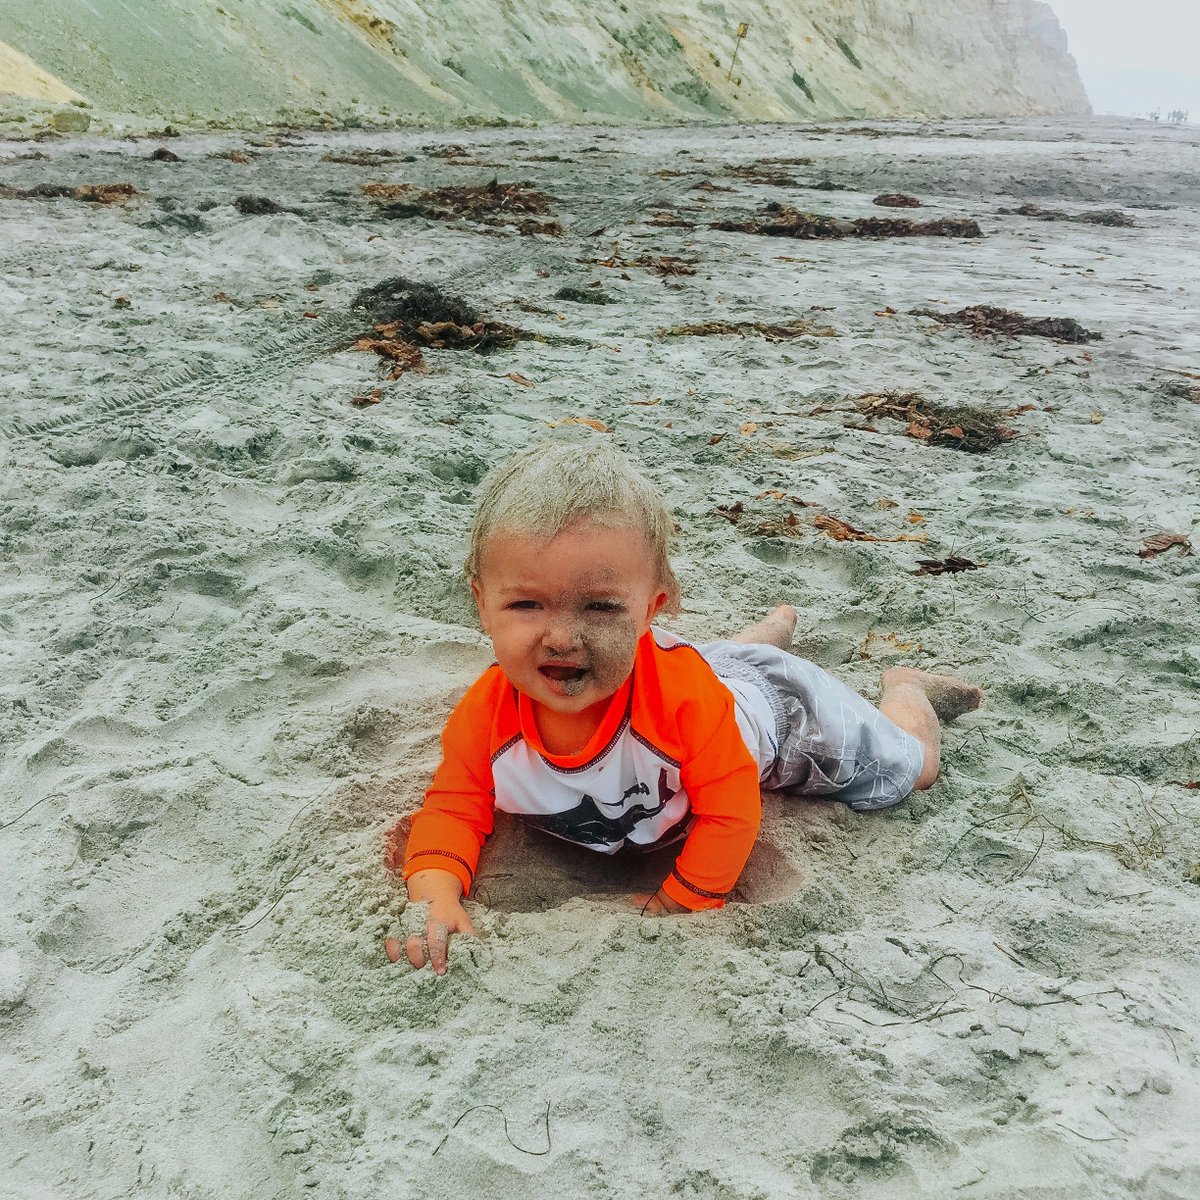 #CyberMonday #traveldeals are on the blog: bit.ly/cybermondaytra… Deals from cruise lines, hotels & #travel booking sites. #traveltip: I wouldn’t recommend eating the sand on your vacation. #travelwithbaby #travelwithkids #babycantravel #takeyourkidseverywhere #visitSD